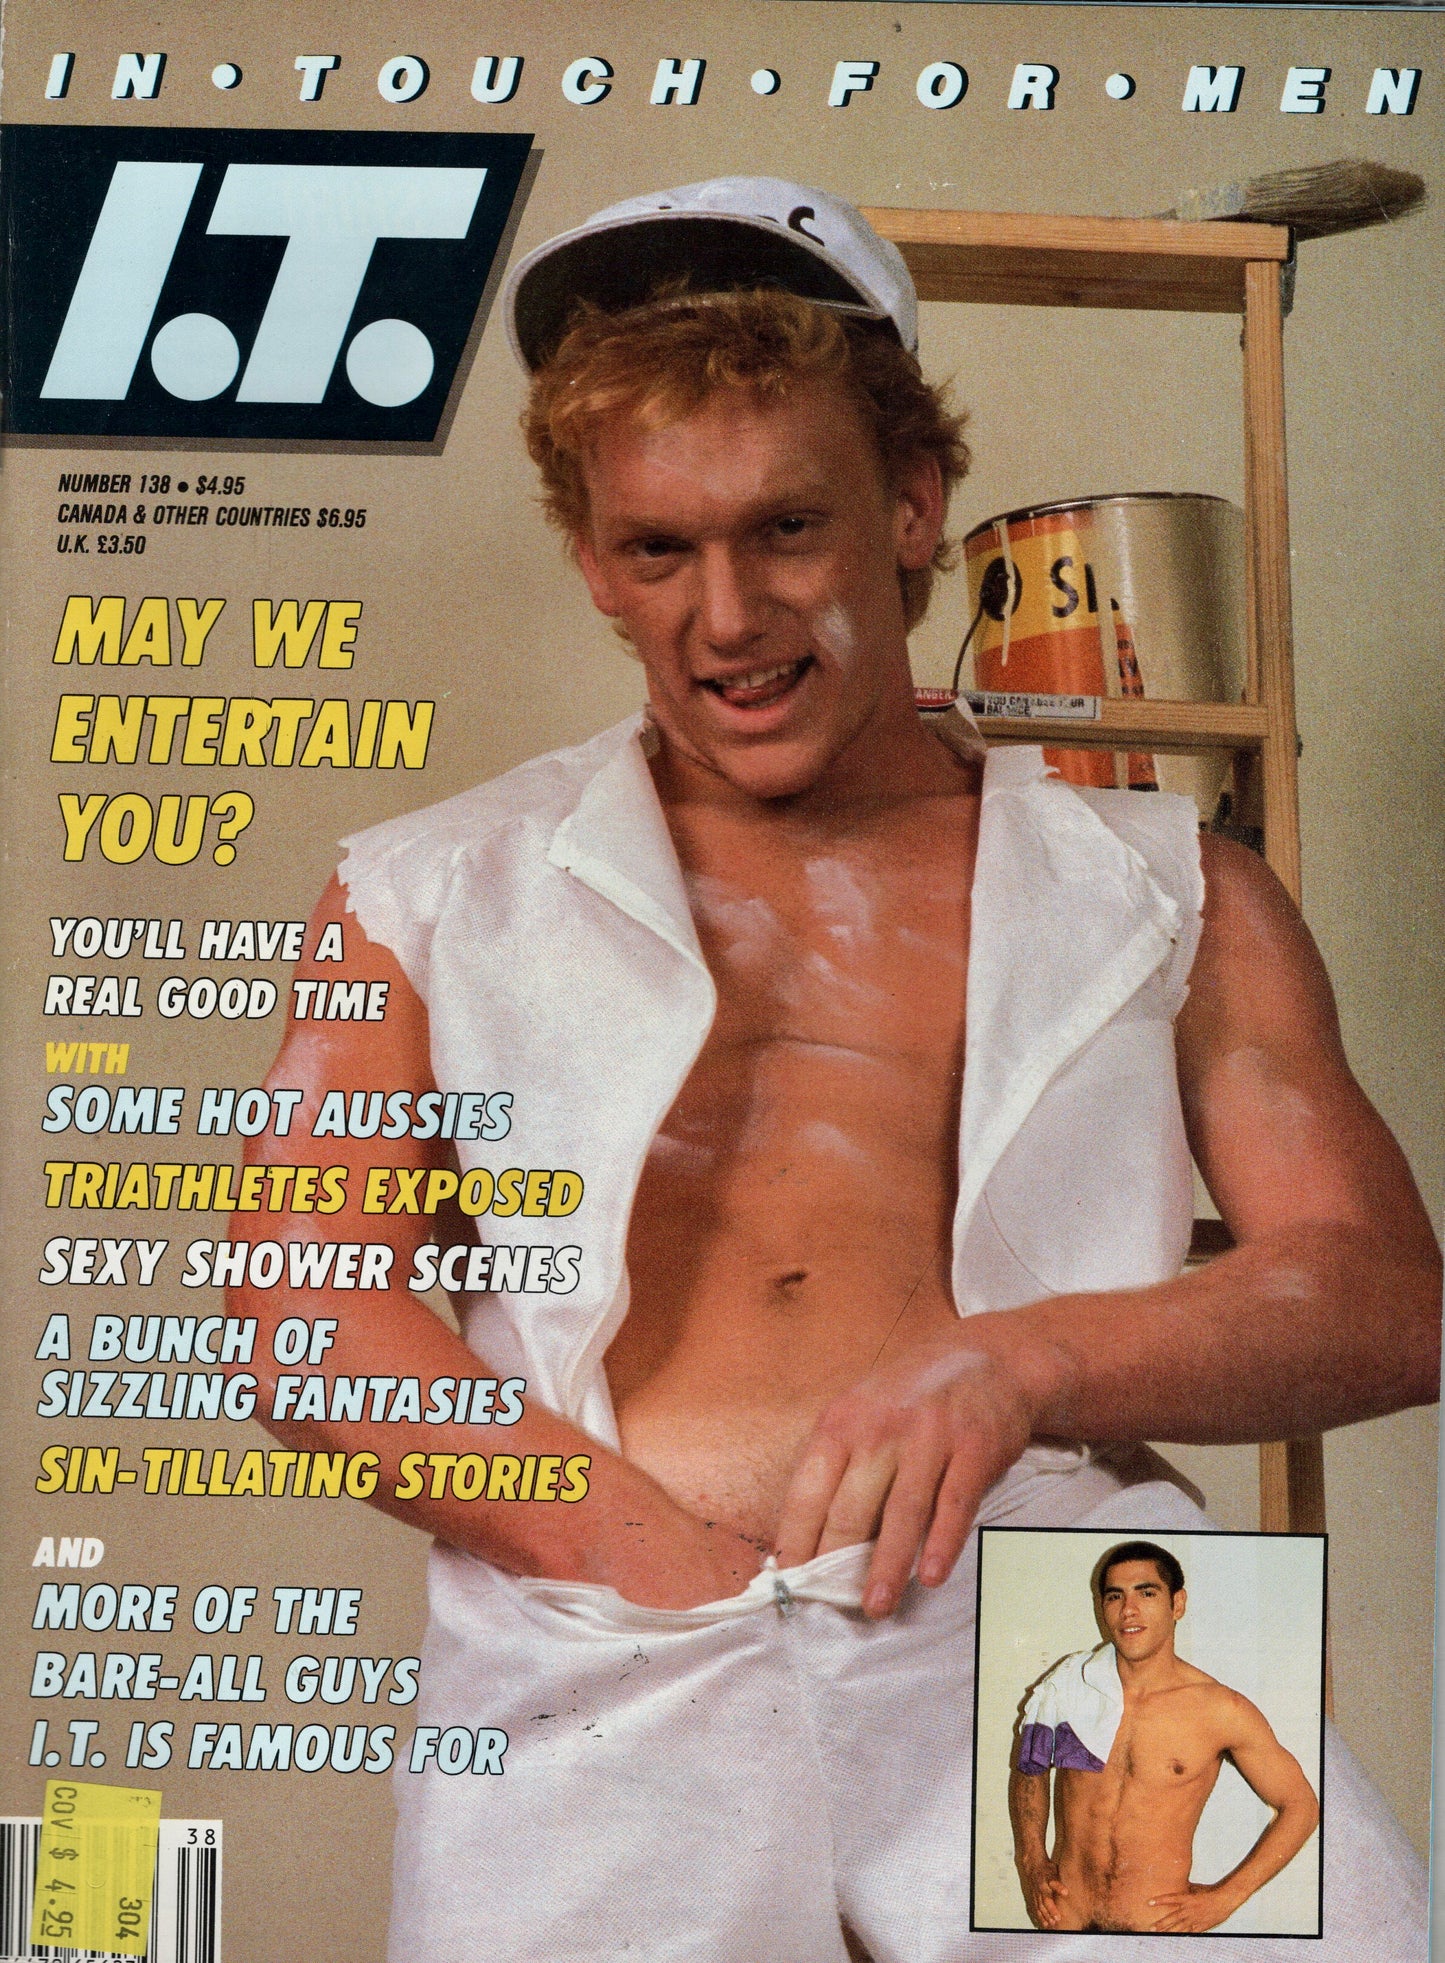 1988 May In Touch for Men Magazine Issue 138